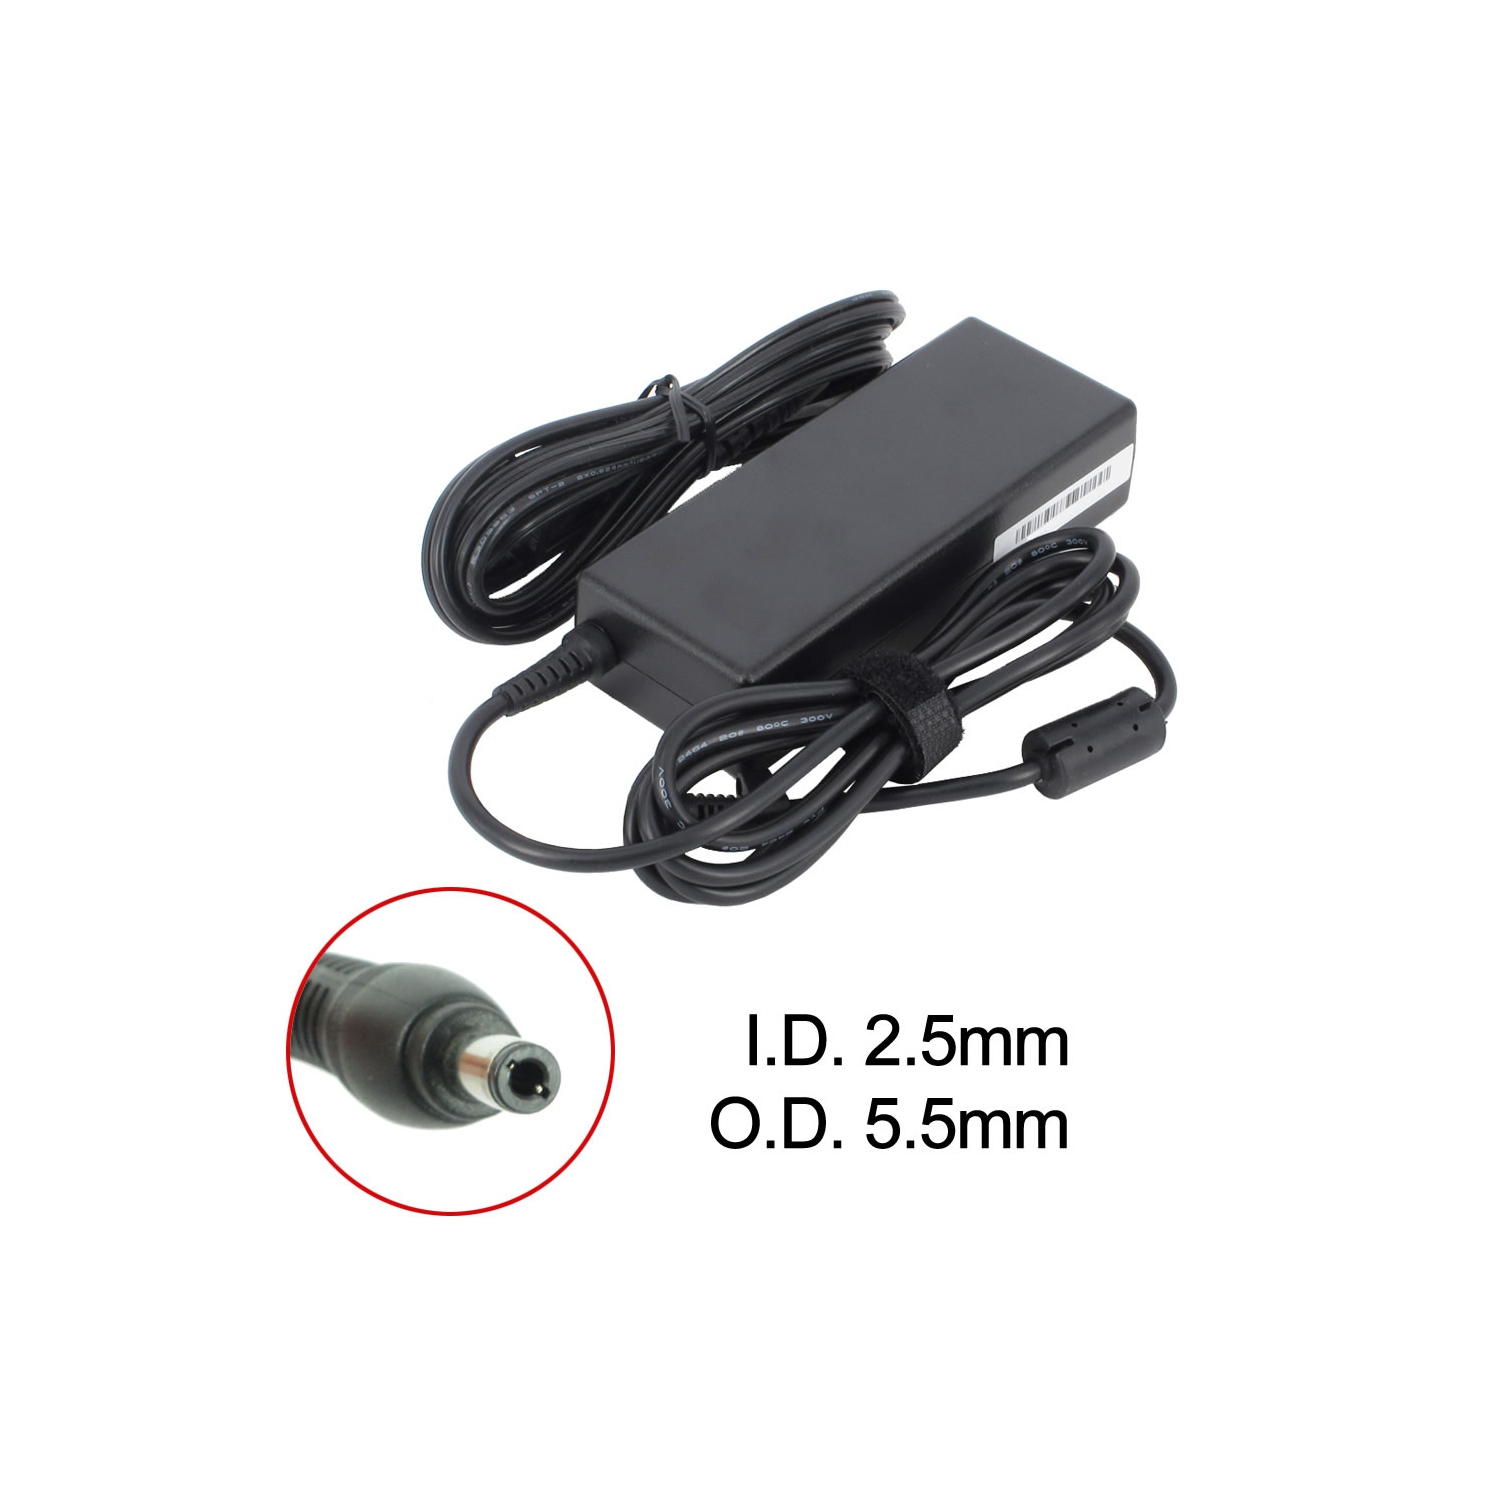 New Laptop AC Adapter for Lenovo IdeaPad Z480, 103942, 808-875692-010A, 9T458, ADP-65 HB BBEF, PA-1900-36, SA80-3115